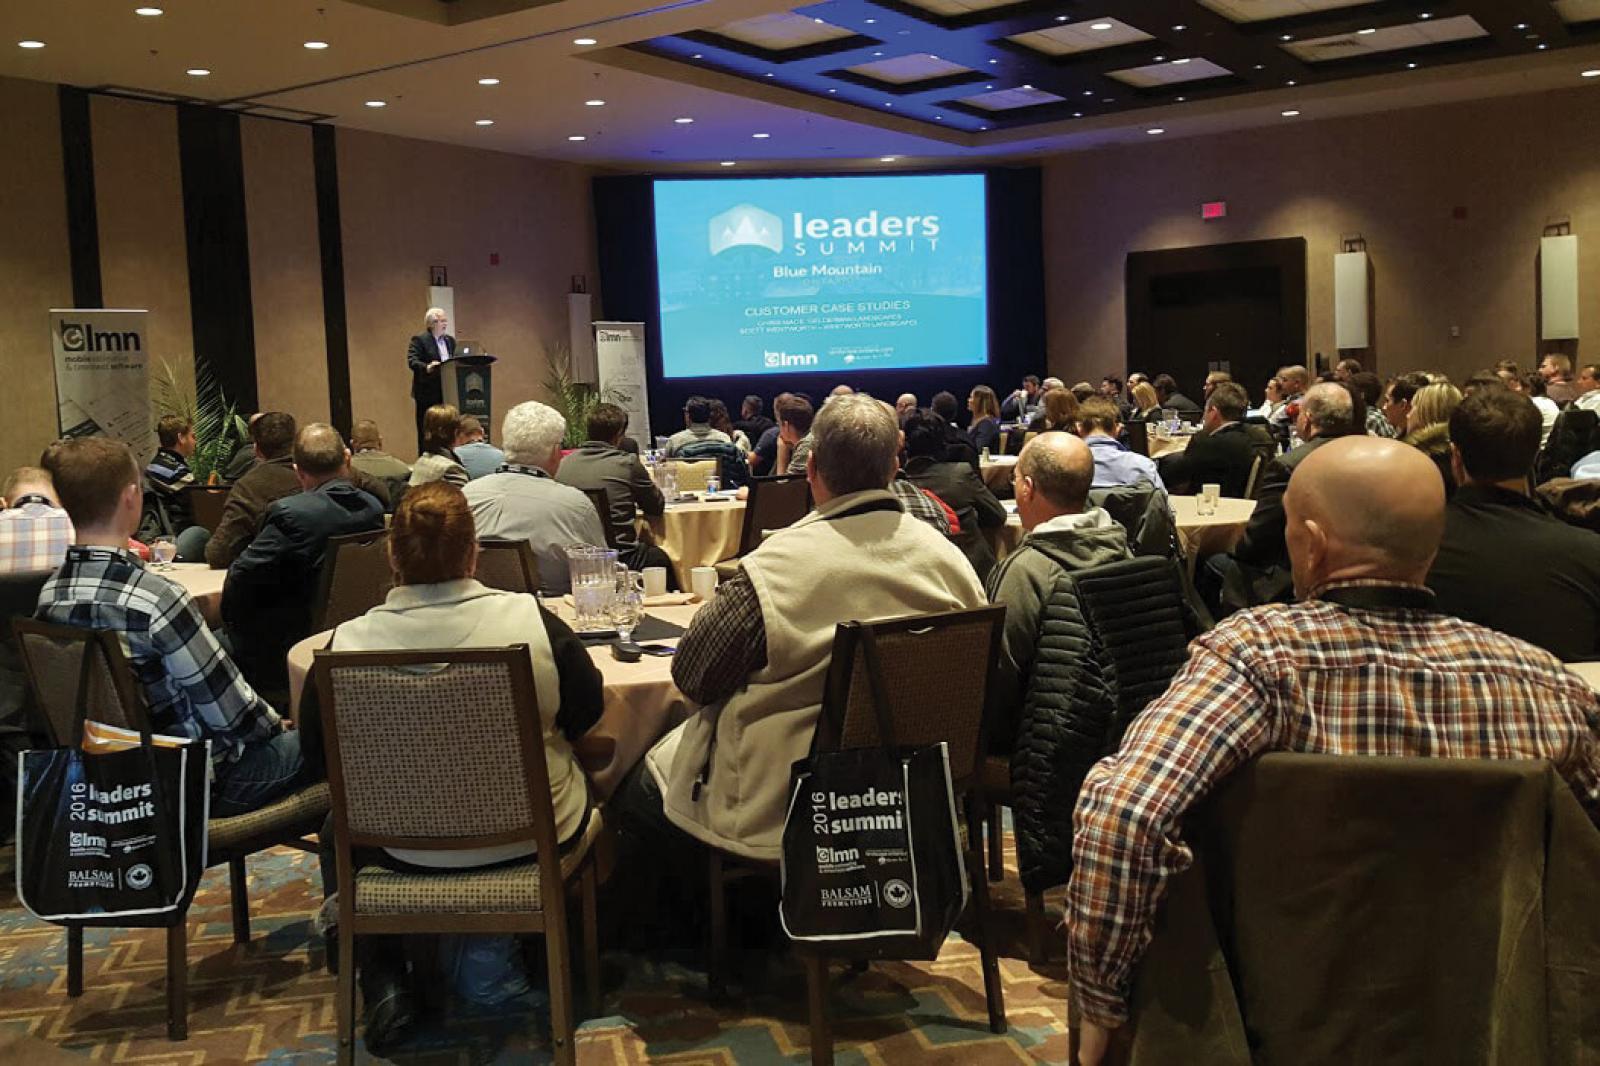 Over 100 industry professionals attended two days of educational sessions, networking and social events at the leaders summit in February.